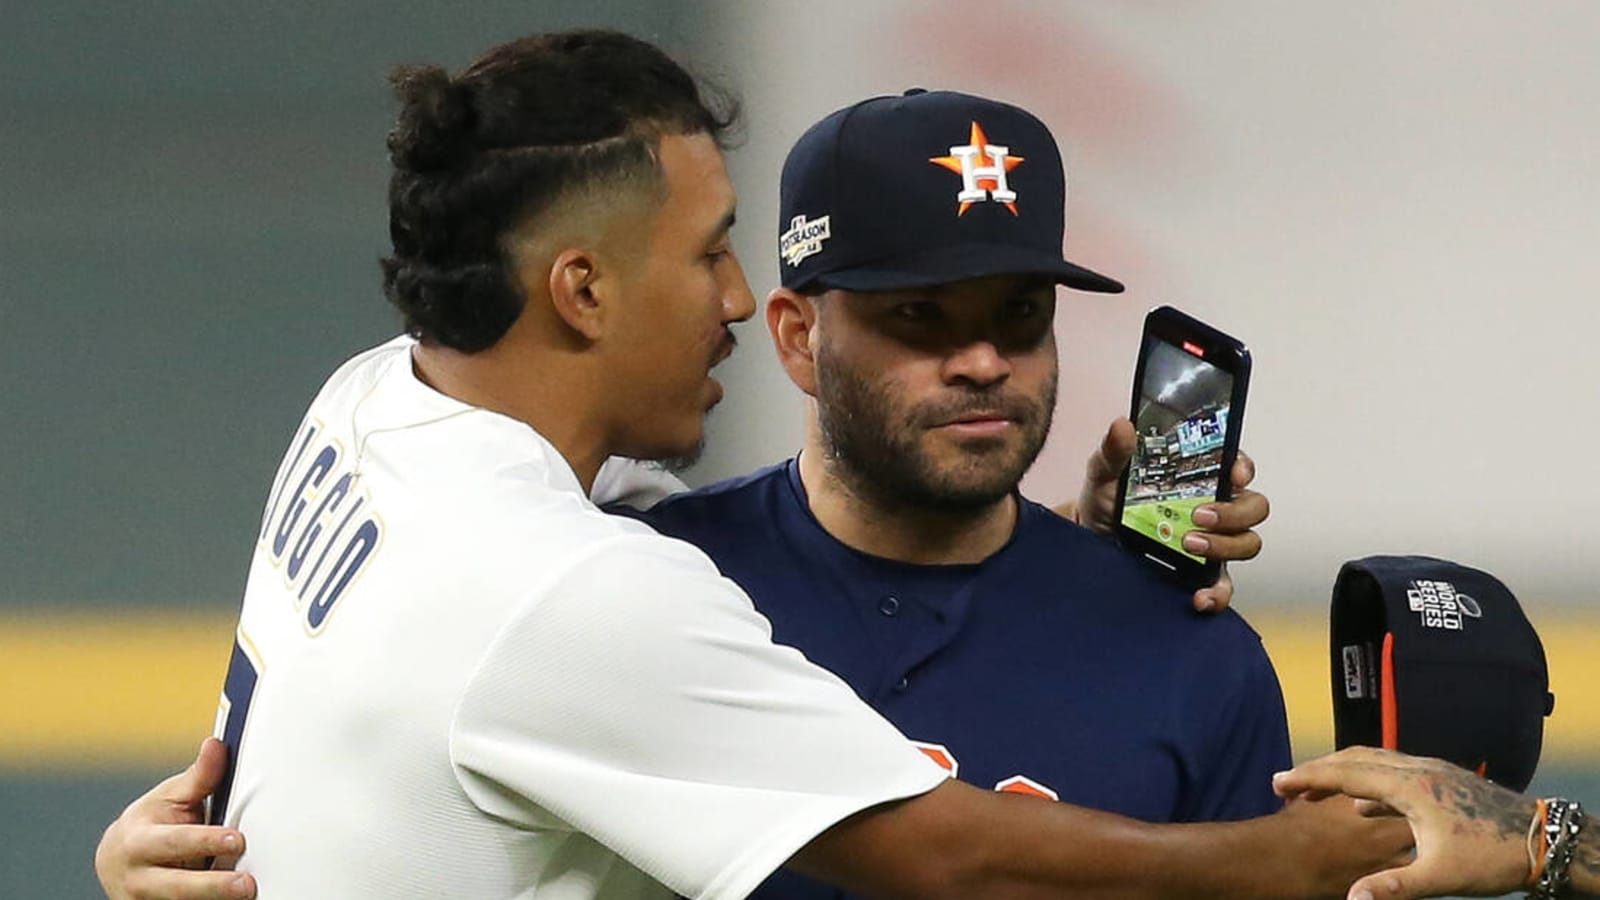 Astros: Jose Altuve's heartwarming gesture for young fan who